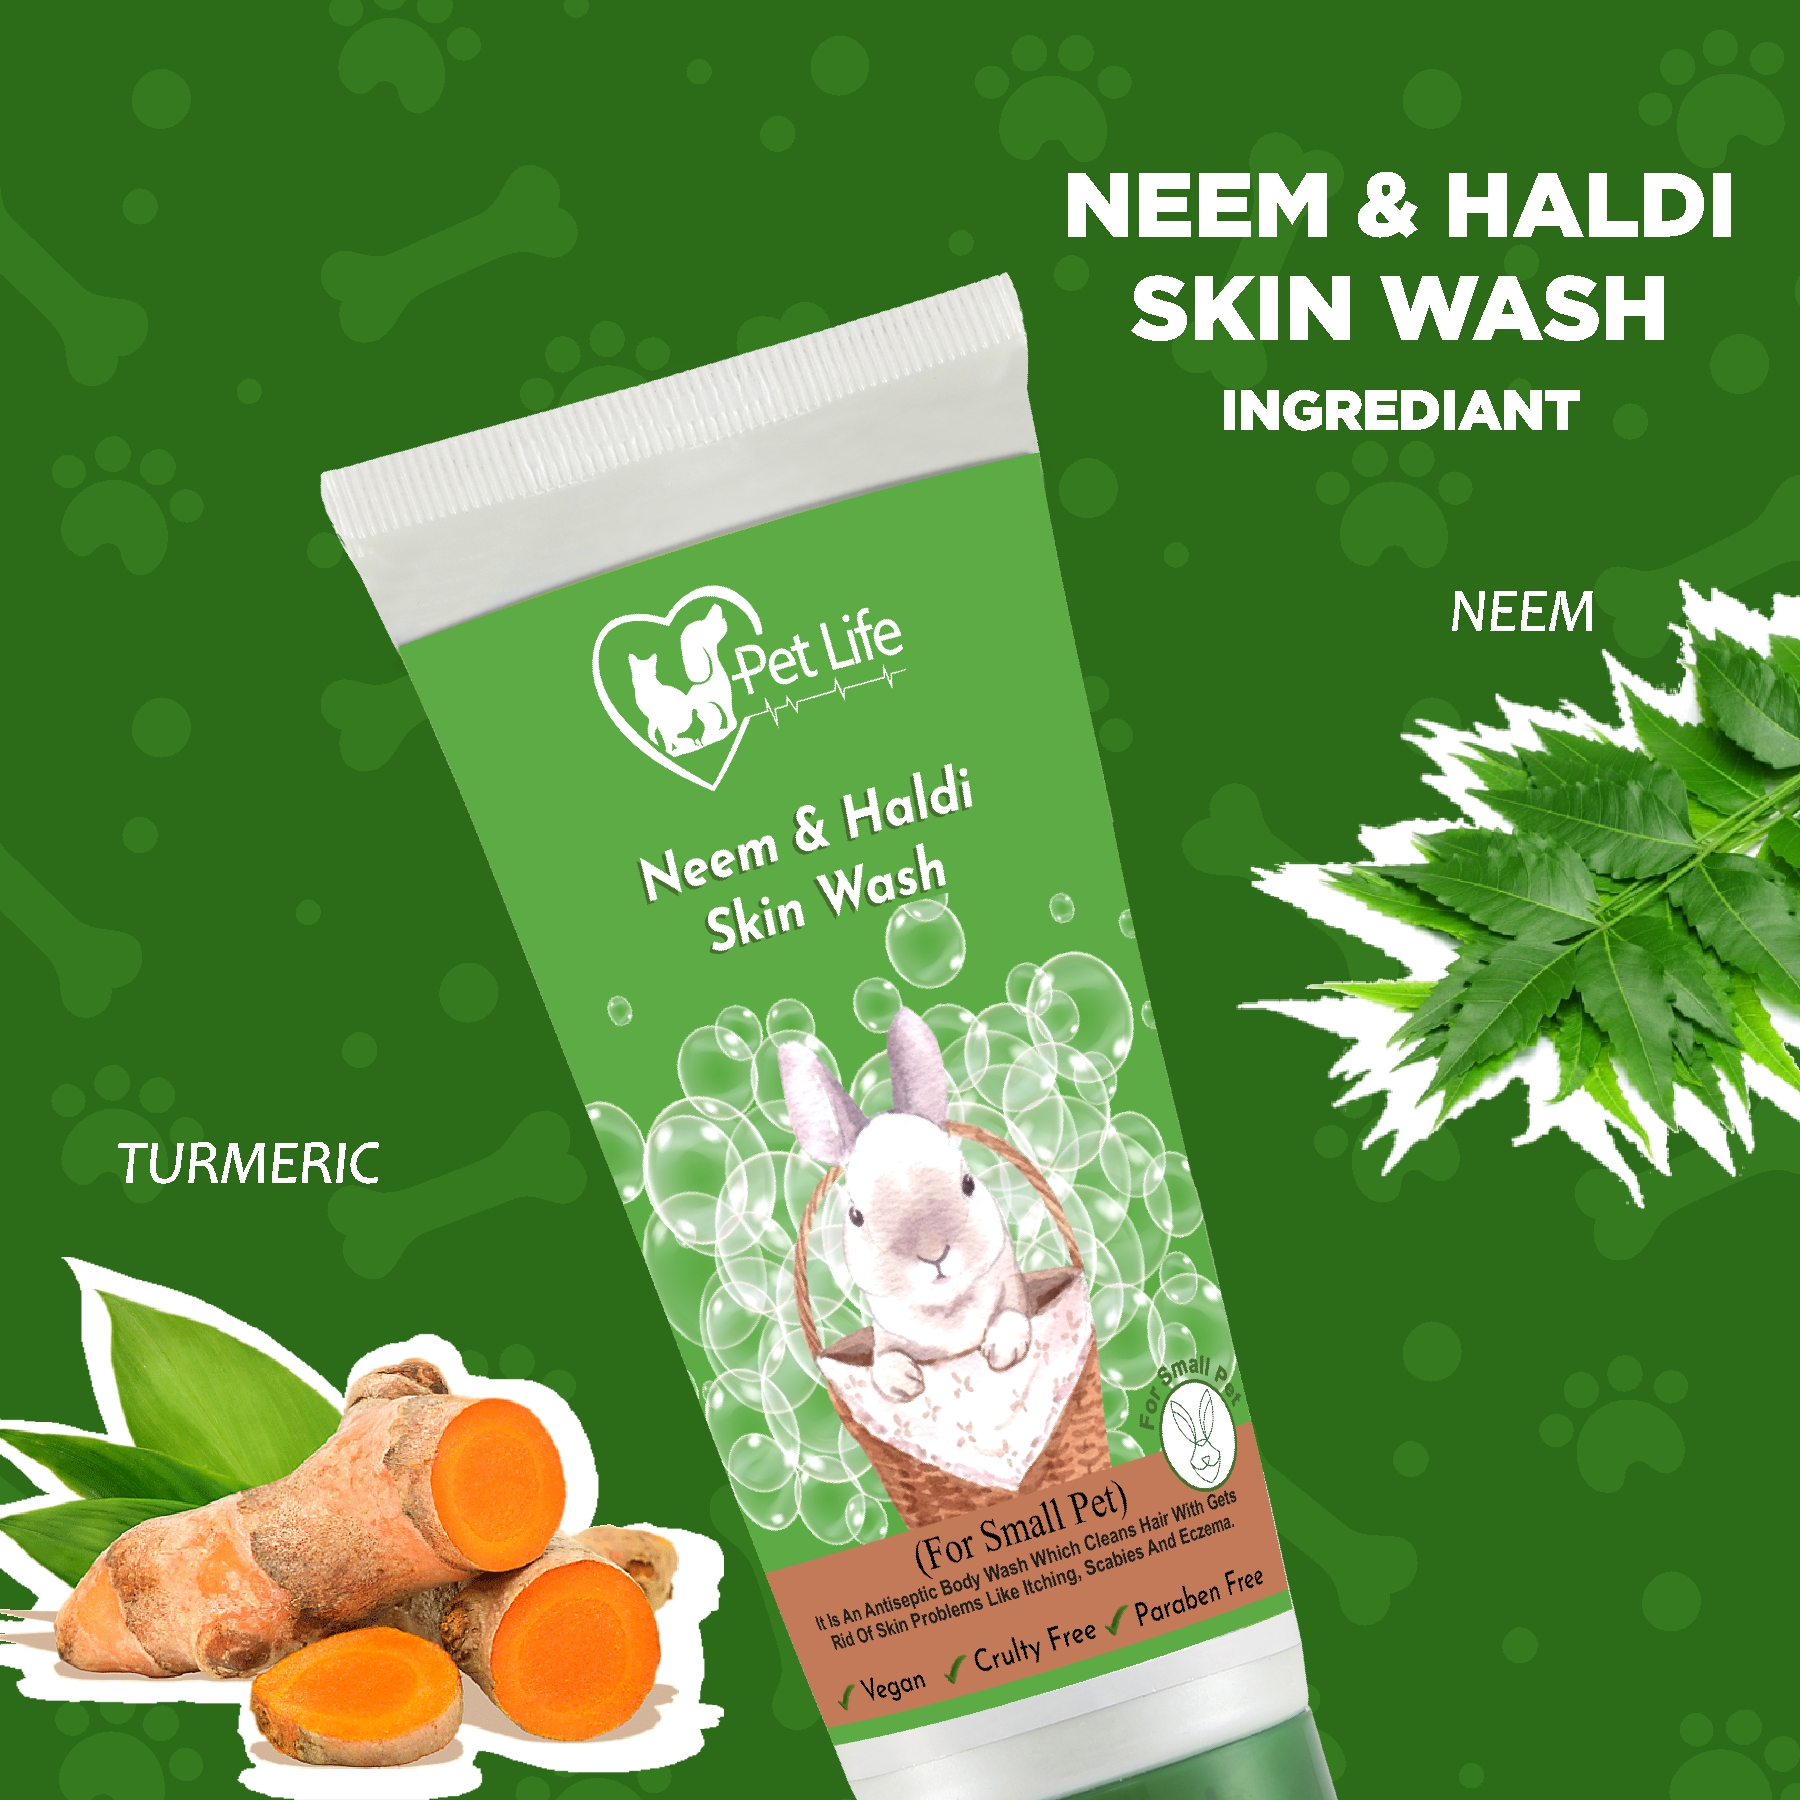 Pet Life Organic Neem Haldi Skin Wash for Small Pets, Rabbits & Kitten Help to Reduce Hair Shedding & Anti Itching Body Wash – Safe Pet Friendly Formula for All Small Pet Breed - 100 Ml